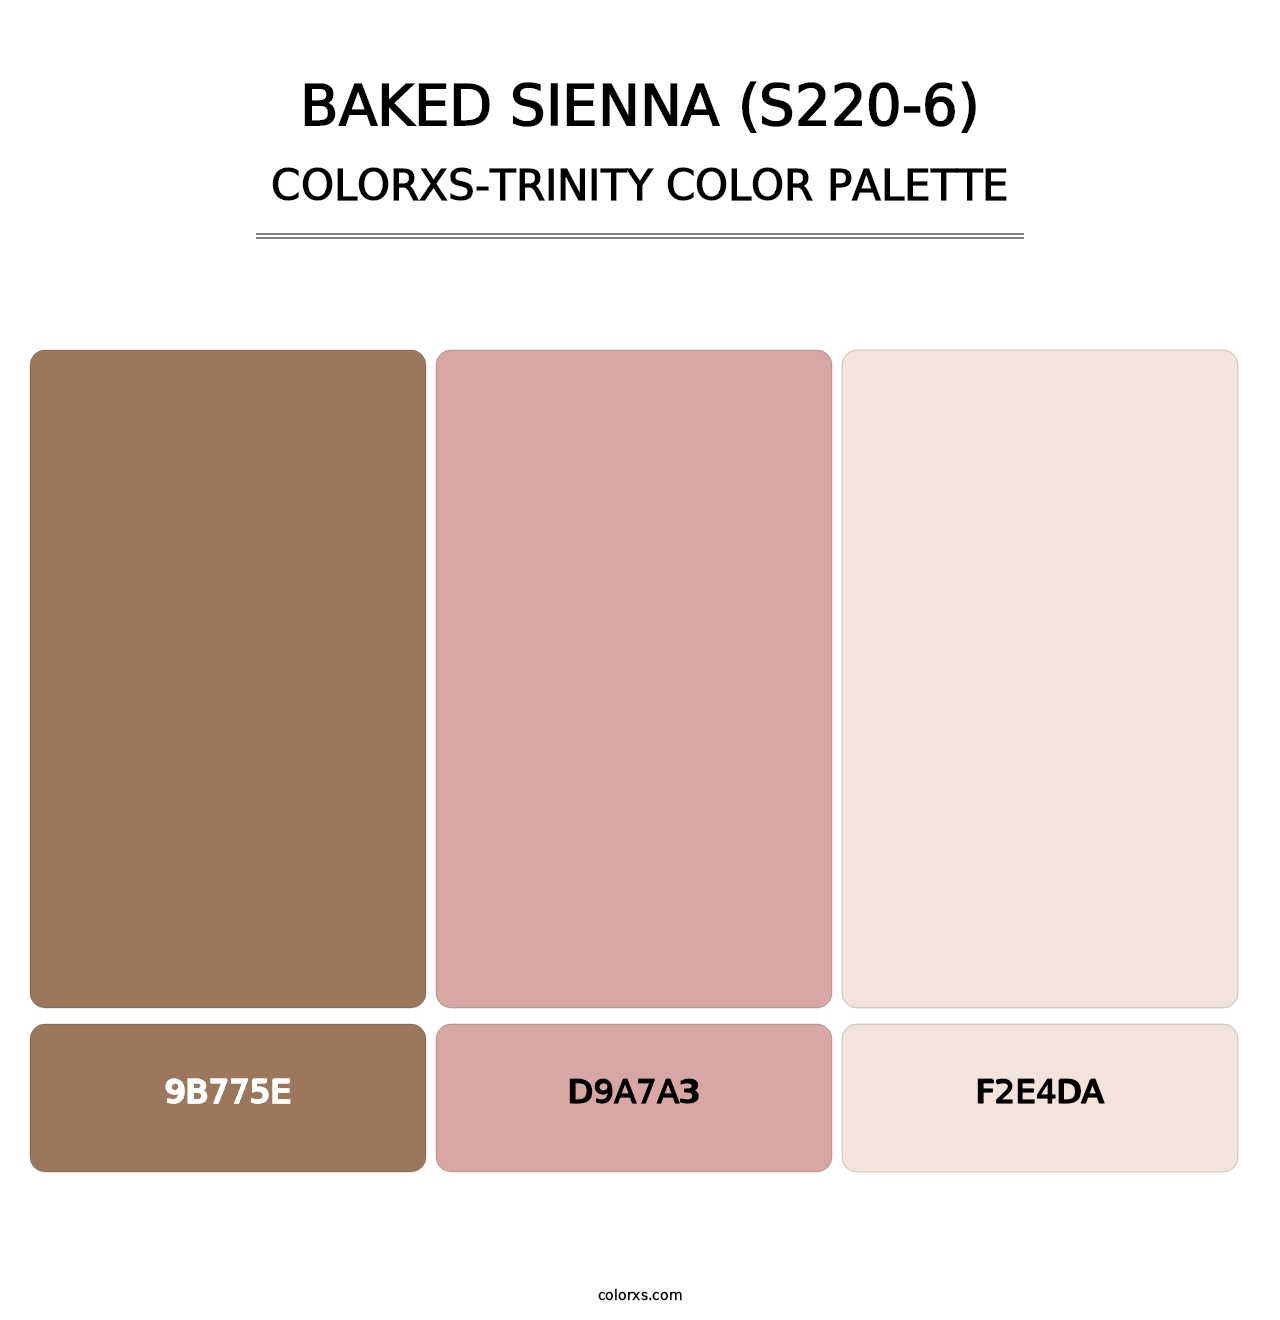 Baked Sienna (S220-6) - Colorxs Trinity Palette